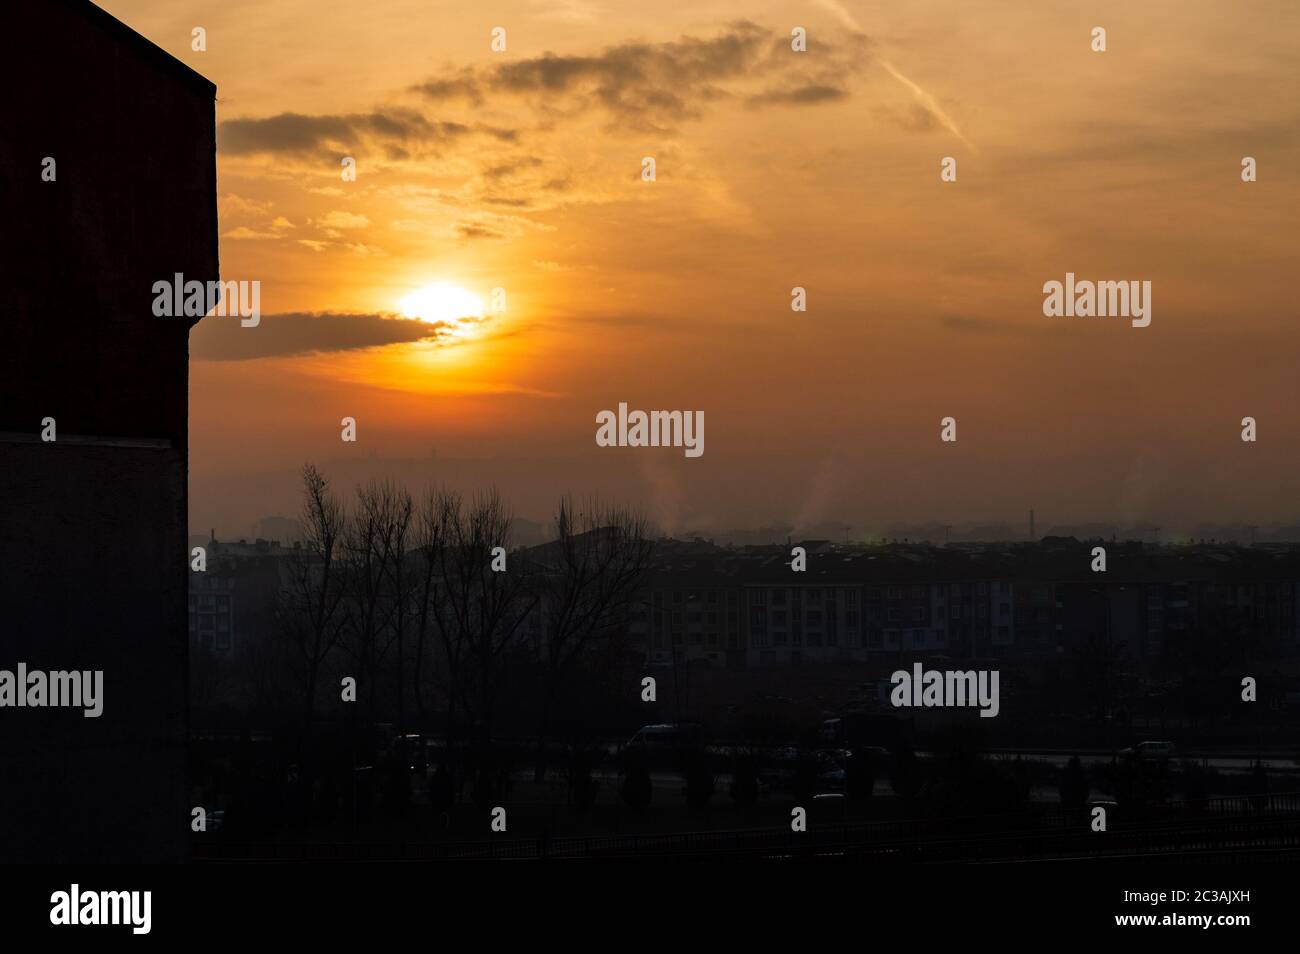 Beautiful sunset scenery over the city, orange sky and city silhouette background. Stock Photo